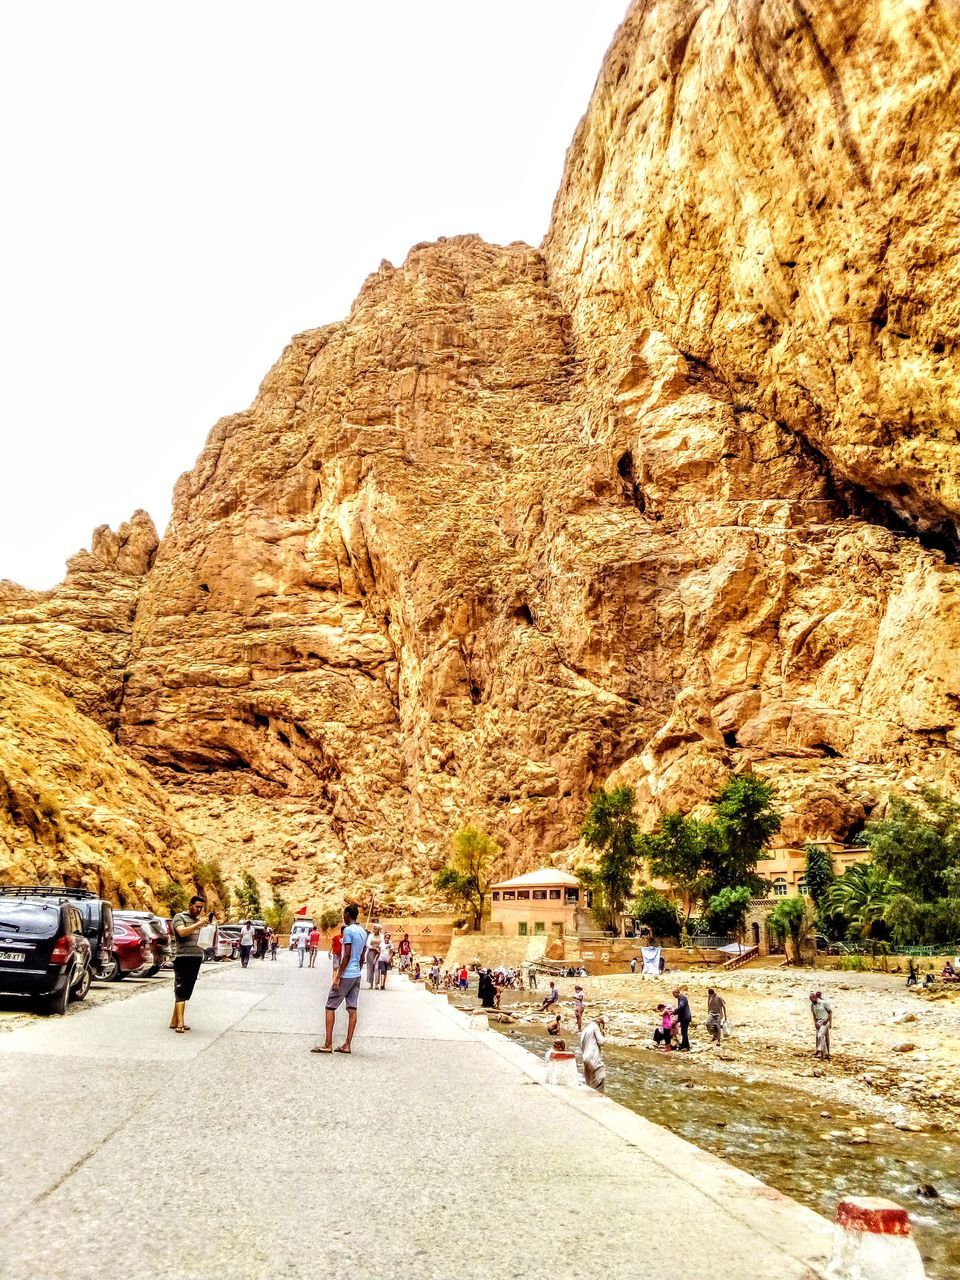 group of people, wadi, rock, rock formation, nature, transportation, large group of people, travel, mountain, day, valley, men, travel destinations, leisure activity, sky, crowd, mode of transportation, adult, land, women, lifestyles, outdoors, tourism, beauty in nature, walking, road, geology, physical geography, motor vehicle, formation, scenics - nature, plant, architecture, land vehicle, tourist, clear sky, terrain, holiday, vacation, car, trip, rocky mountains, non-urban scene, sunlight, mountain range